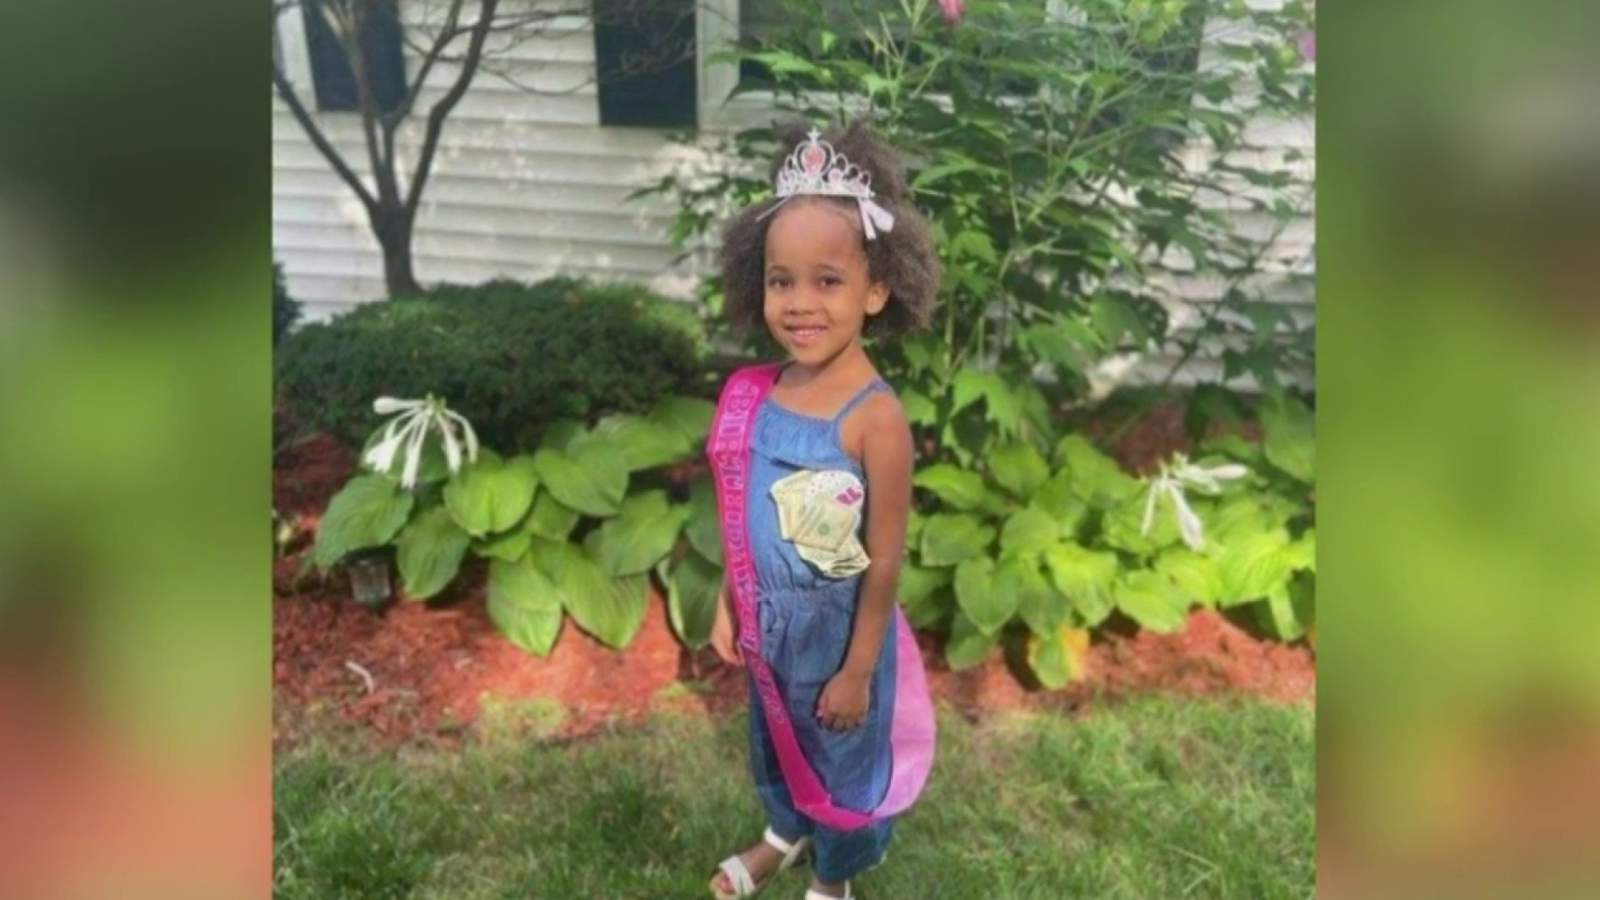 Father mourns death of 6-year-old killed in crash in Detroit